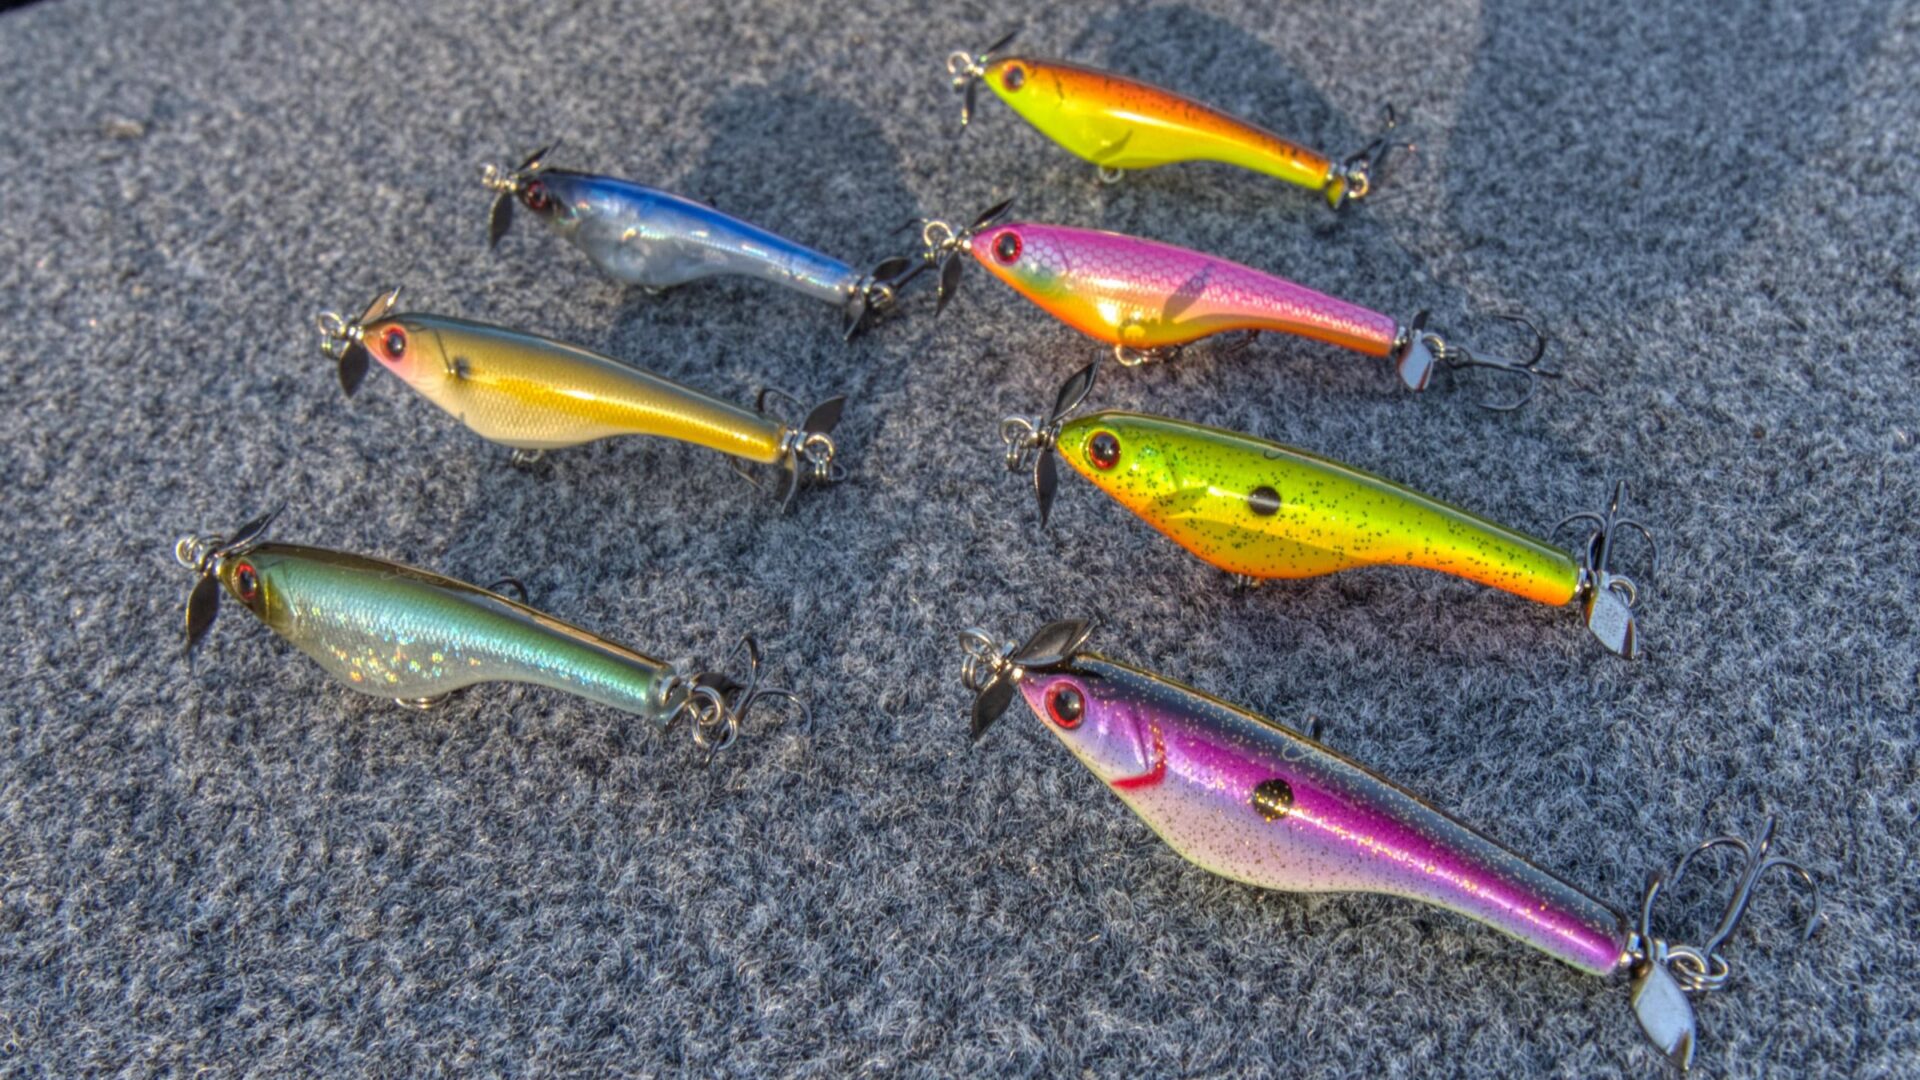 Spybait Crappies, New Lure Trends That Work‼️